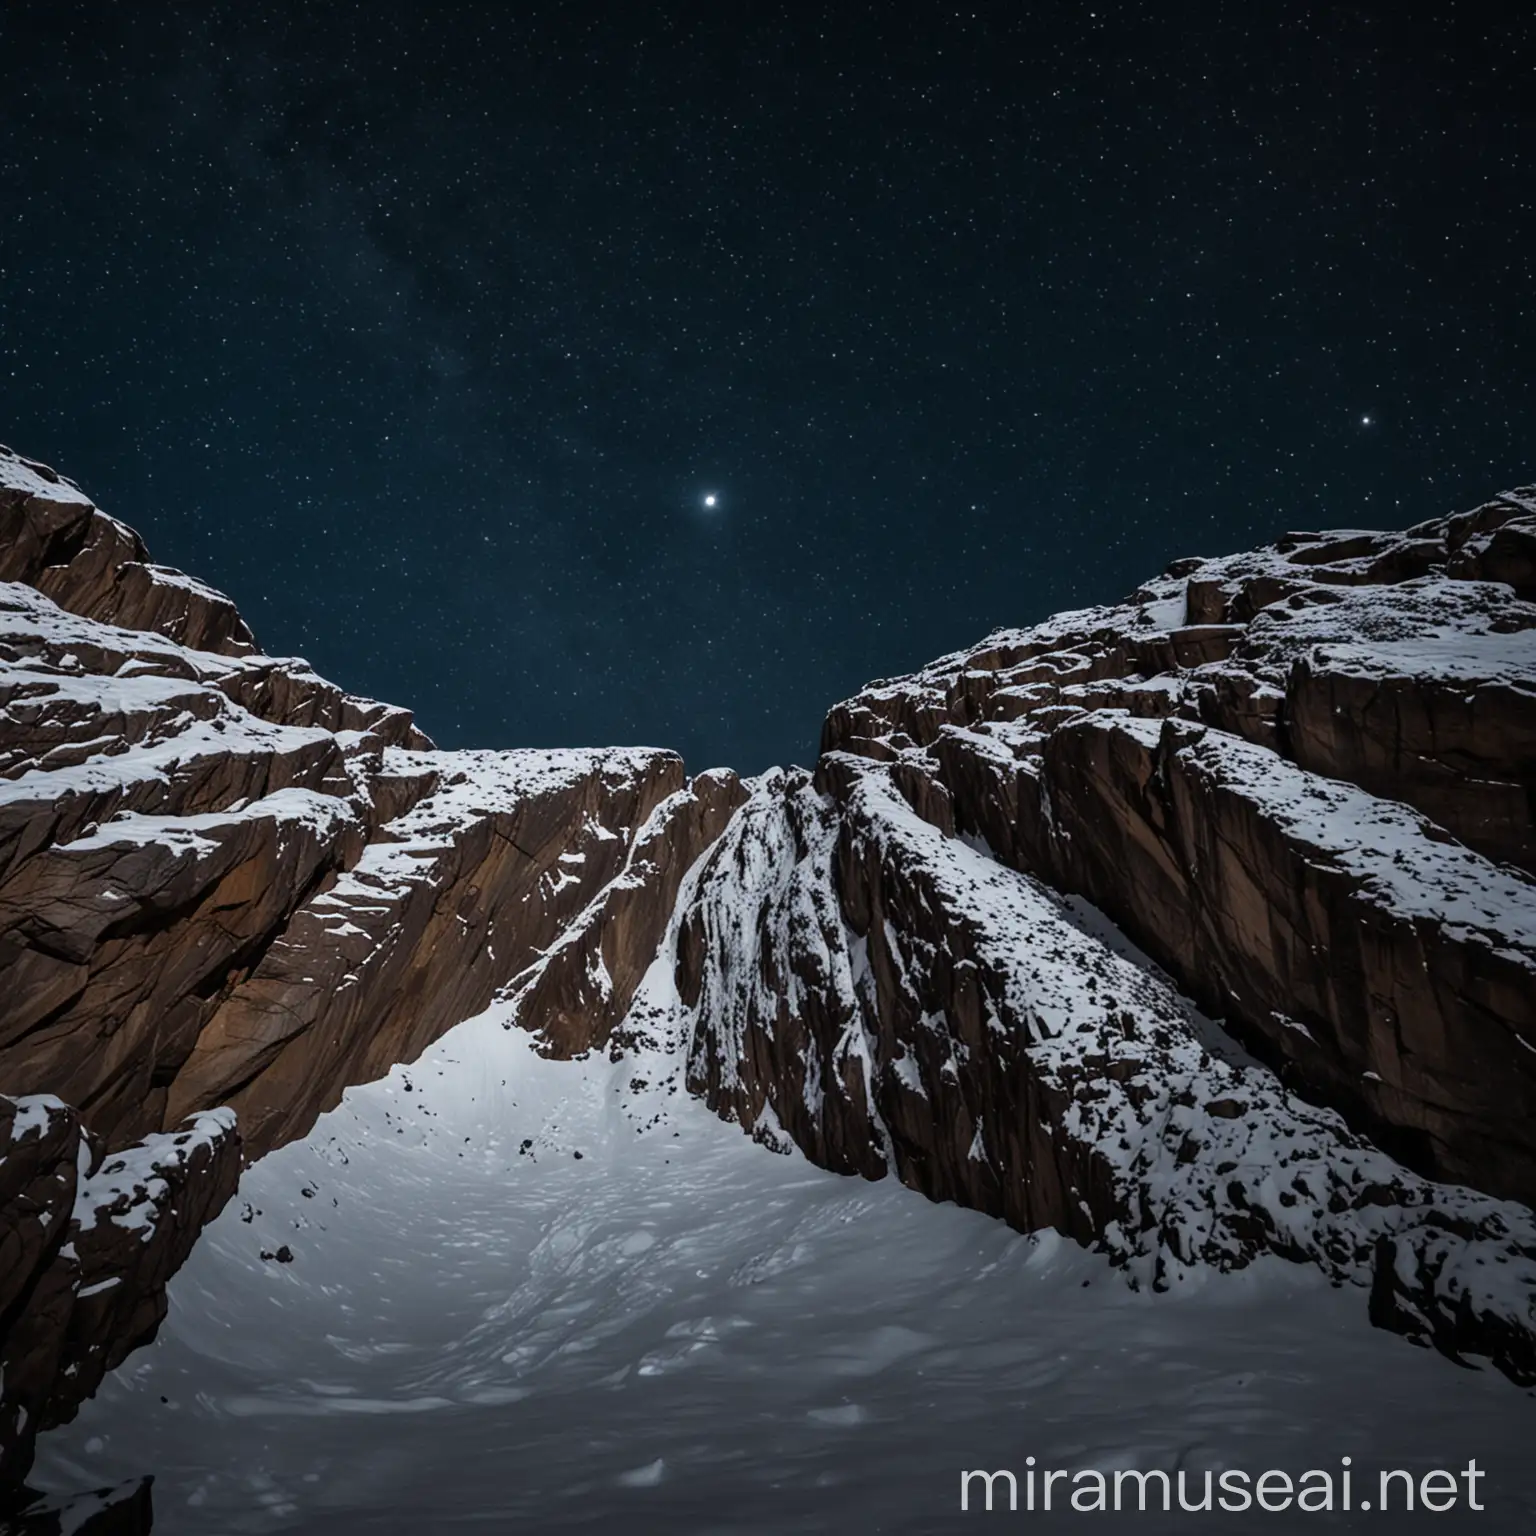 Extreme low angle  of   snowy rock face peek at night. We are looking up at the stare and the peak that is in the center of the frame